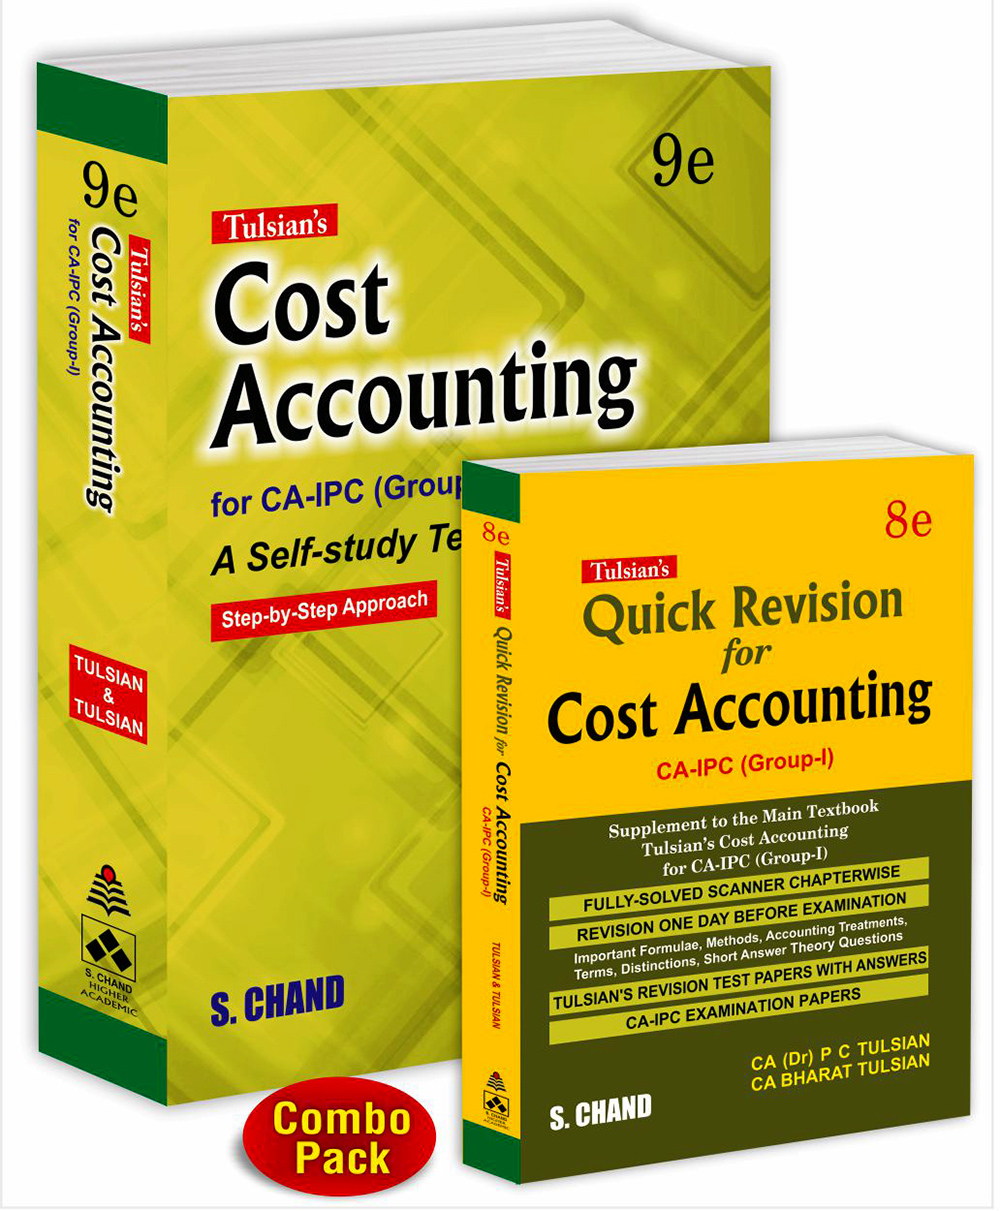 Cost Accounting for CA-IPC (Group-I) With Quick Revision